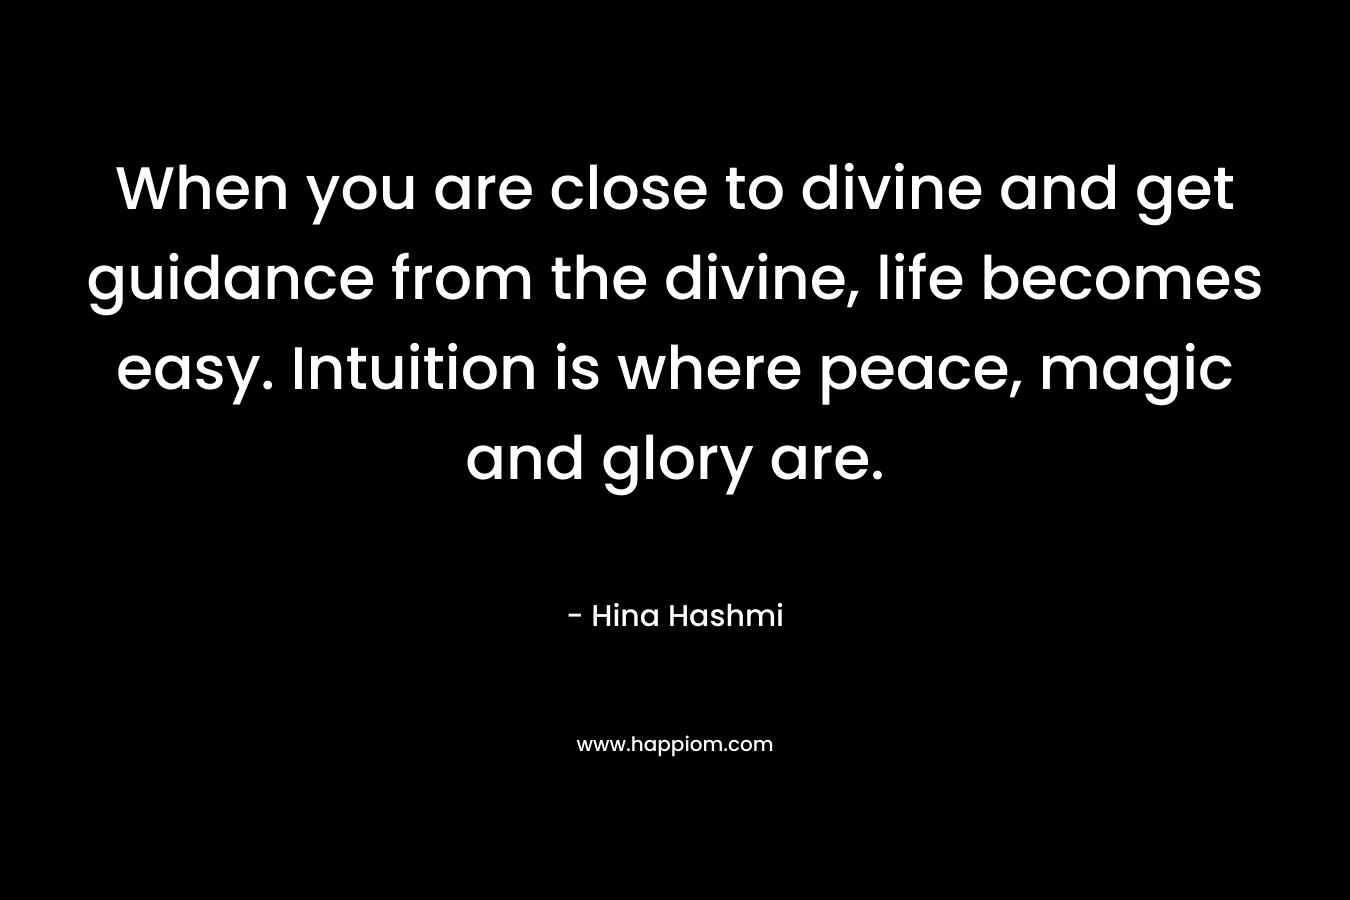 When you are close to divine and get guidance from the divine, life becomes easy. Intuition is where peace, magic and glory are.